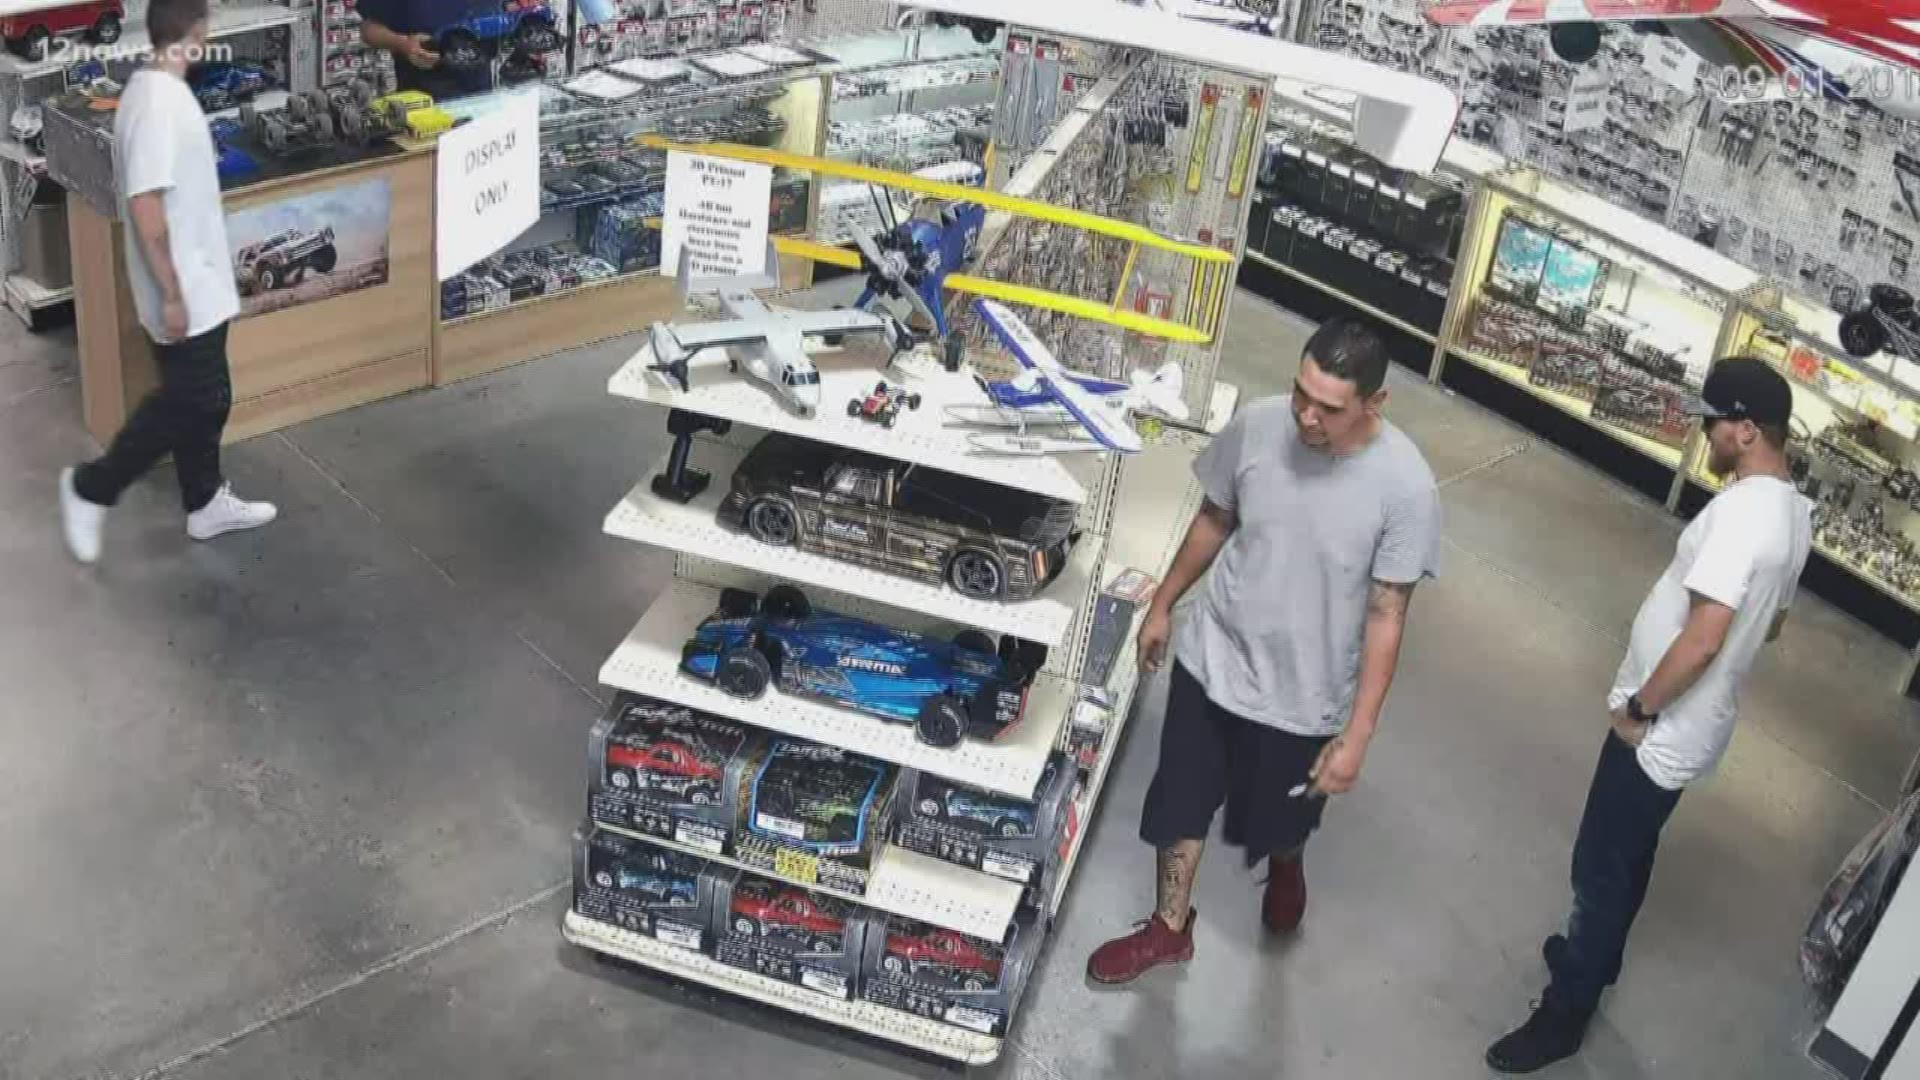 A hobby store owner in Queen Creek is banged up and looking for justice. The owner of Superstition Hobbies says three walked into his store Sunday and stole three remote controlled toy trucks worth more than $2,000.